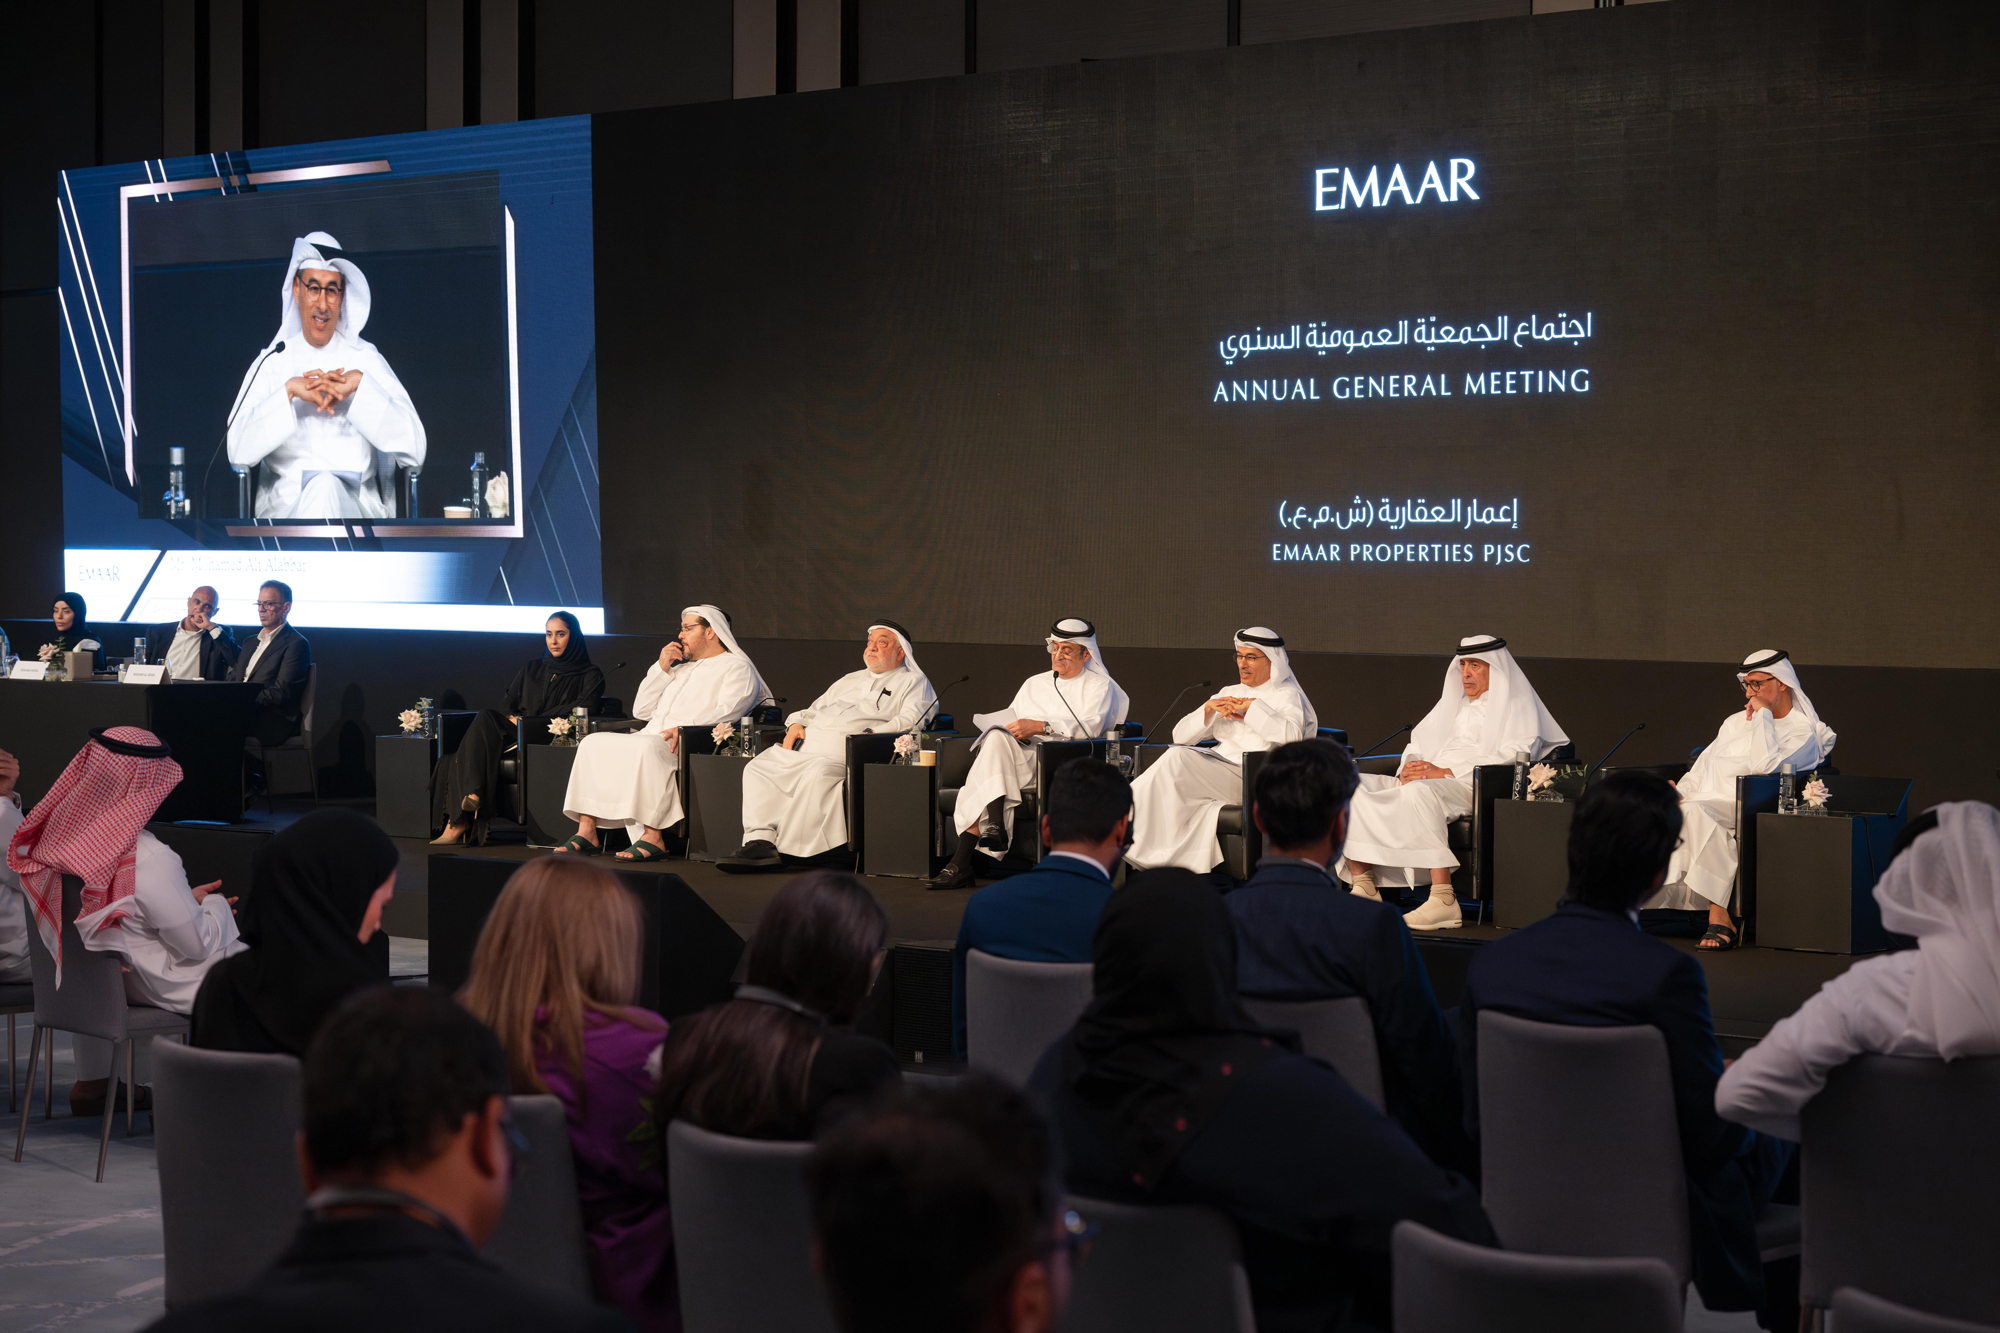 Photo: Emaar Properties announces AED 4.4 billion dividend (50 fils/share) and reports record AED 40.3 billion property sales in 2023